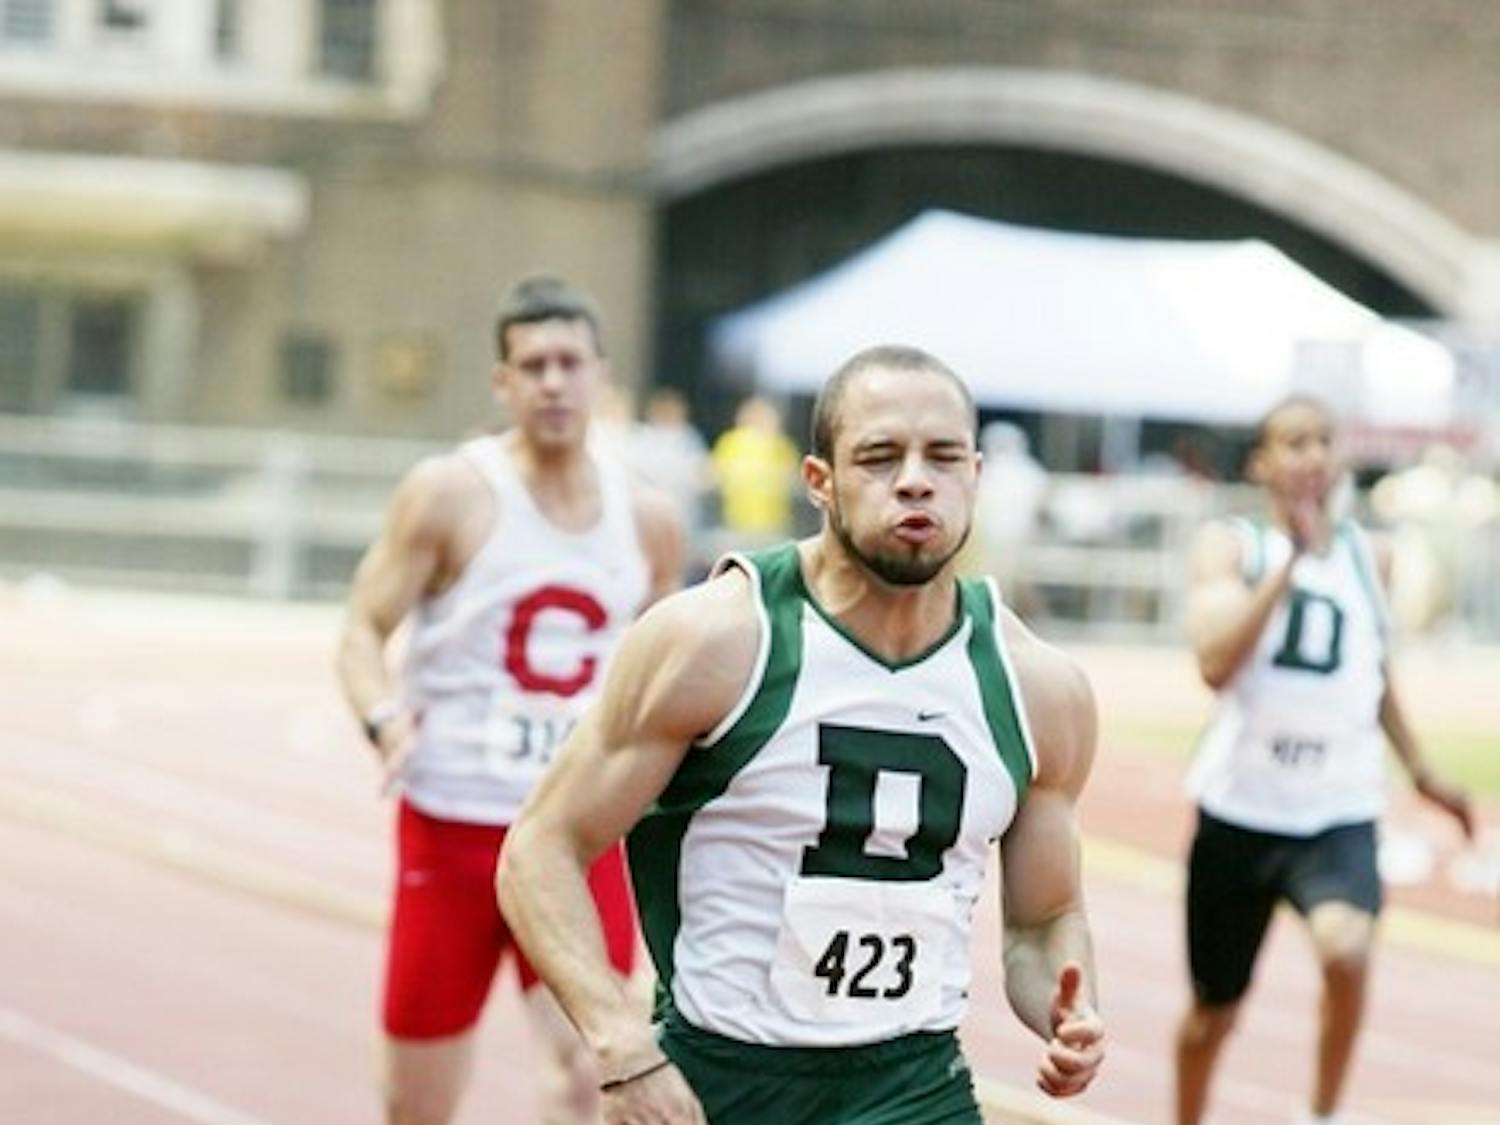 Fatih Stanley '06 storms past his competitors at the Heptagonal Championships, setting new school records in both the 100- and 200-meter dashes.